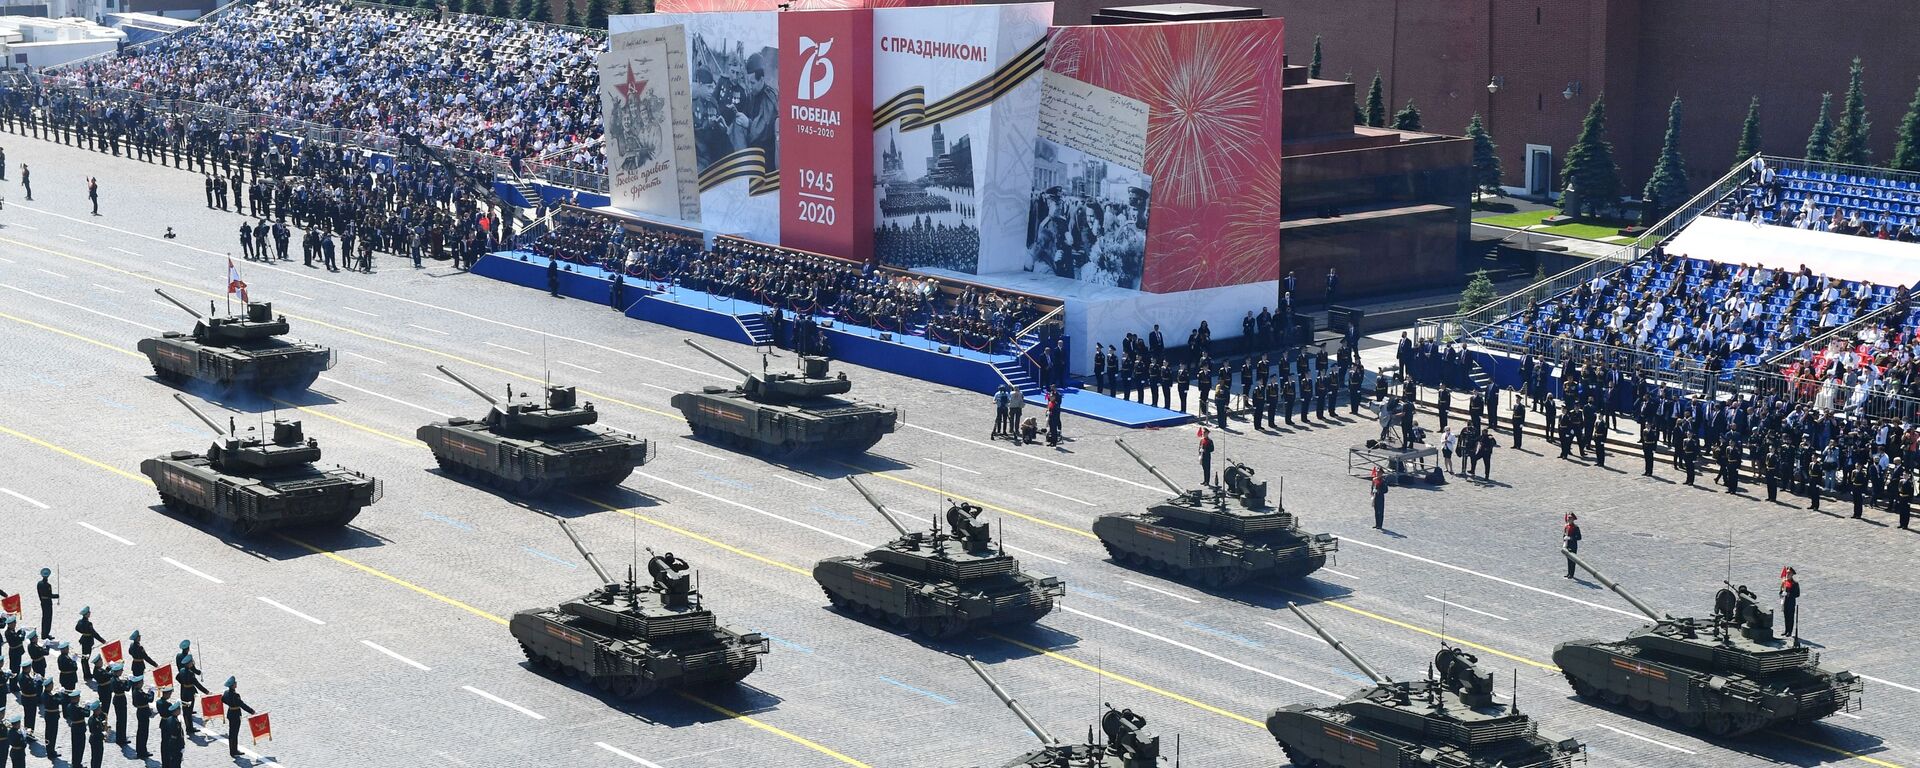 T-14 Armata and T-90M tanks during the June 24, 2020 parade dedicated to Victory in the Great Patriotic War of 1941-1945 on Red Square. - Sputnik International, 1920, 28.12.2021